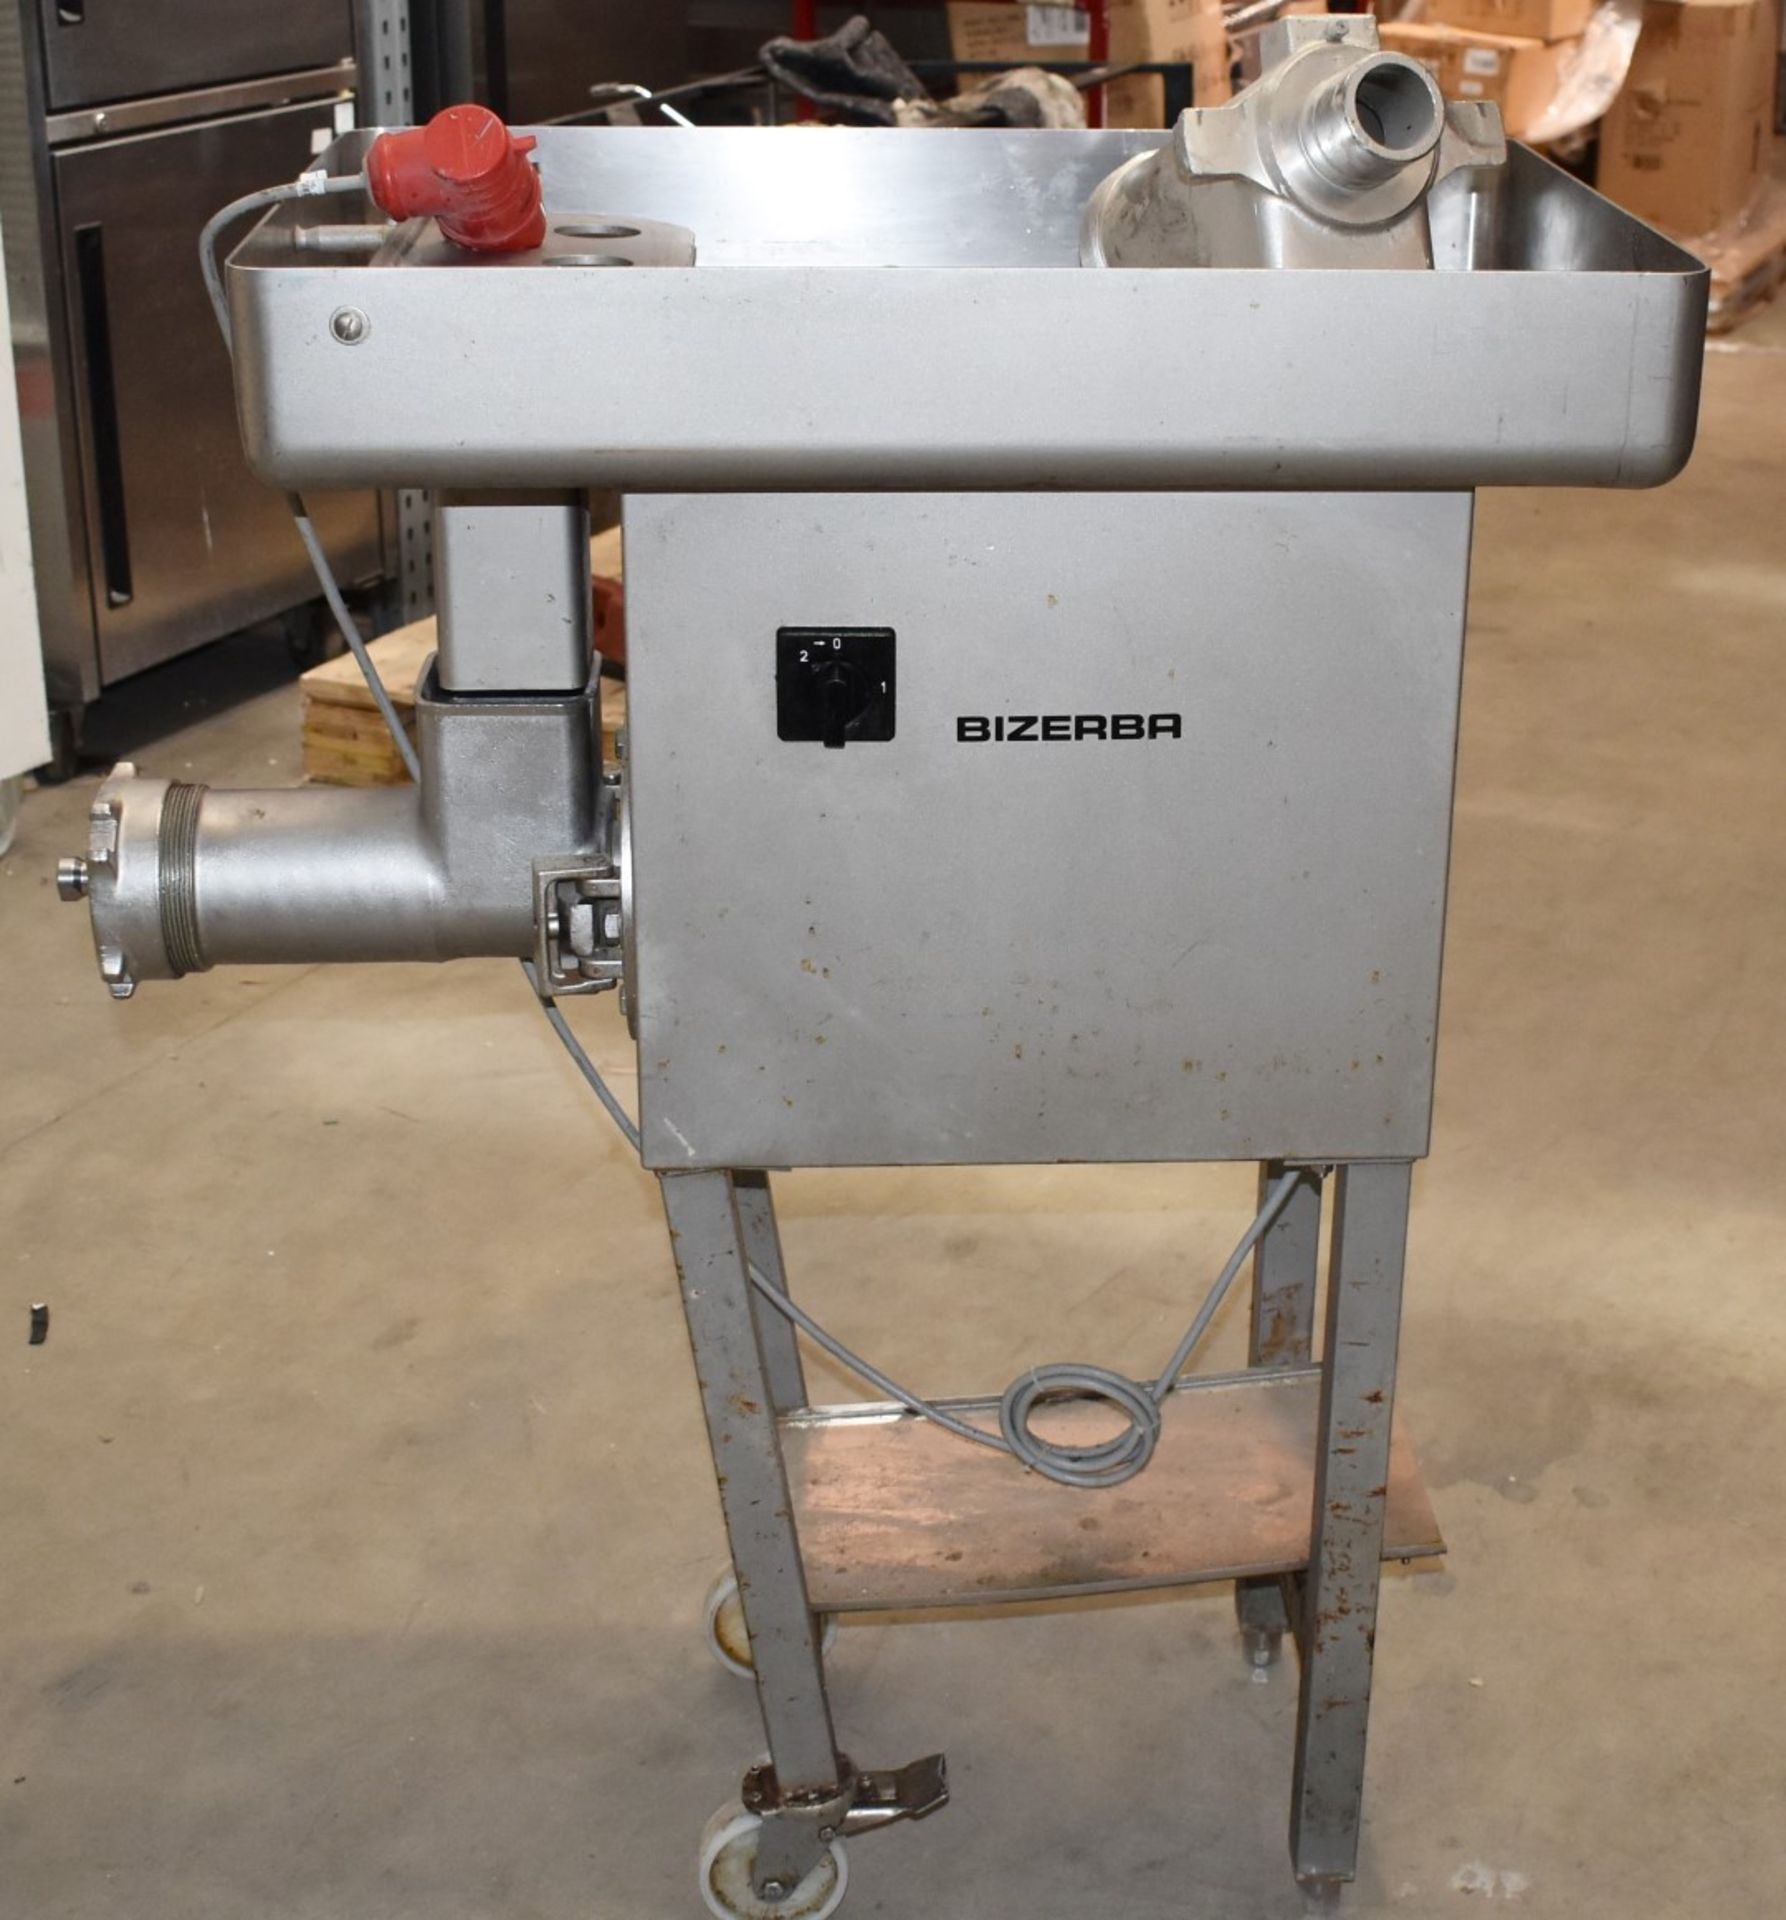 1 x Bizerba Meat Mincer - With Stand and Various Accessories - Model FW-N32S/2 - 3 Phase - Image 13 of 14